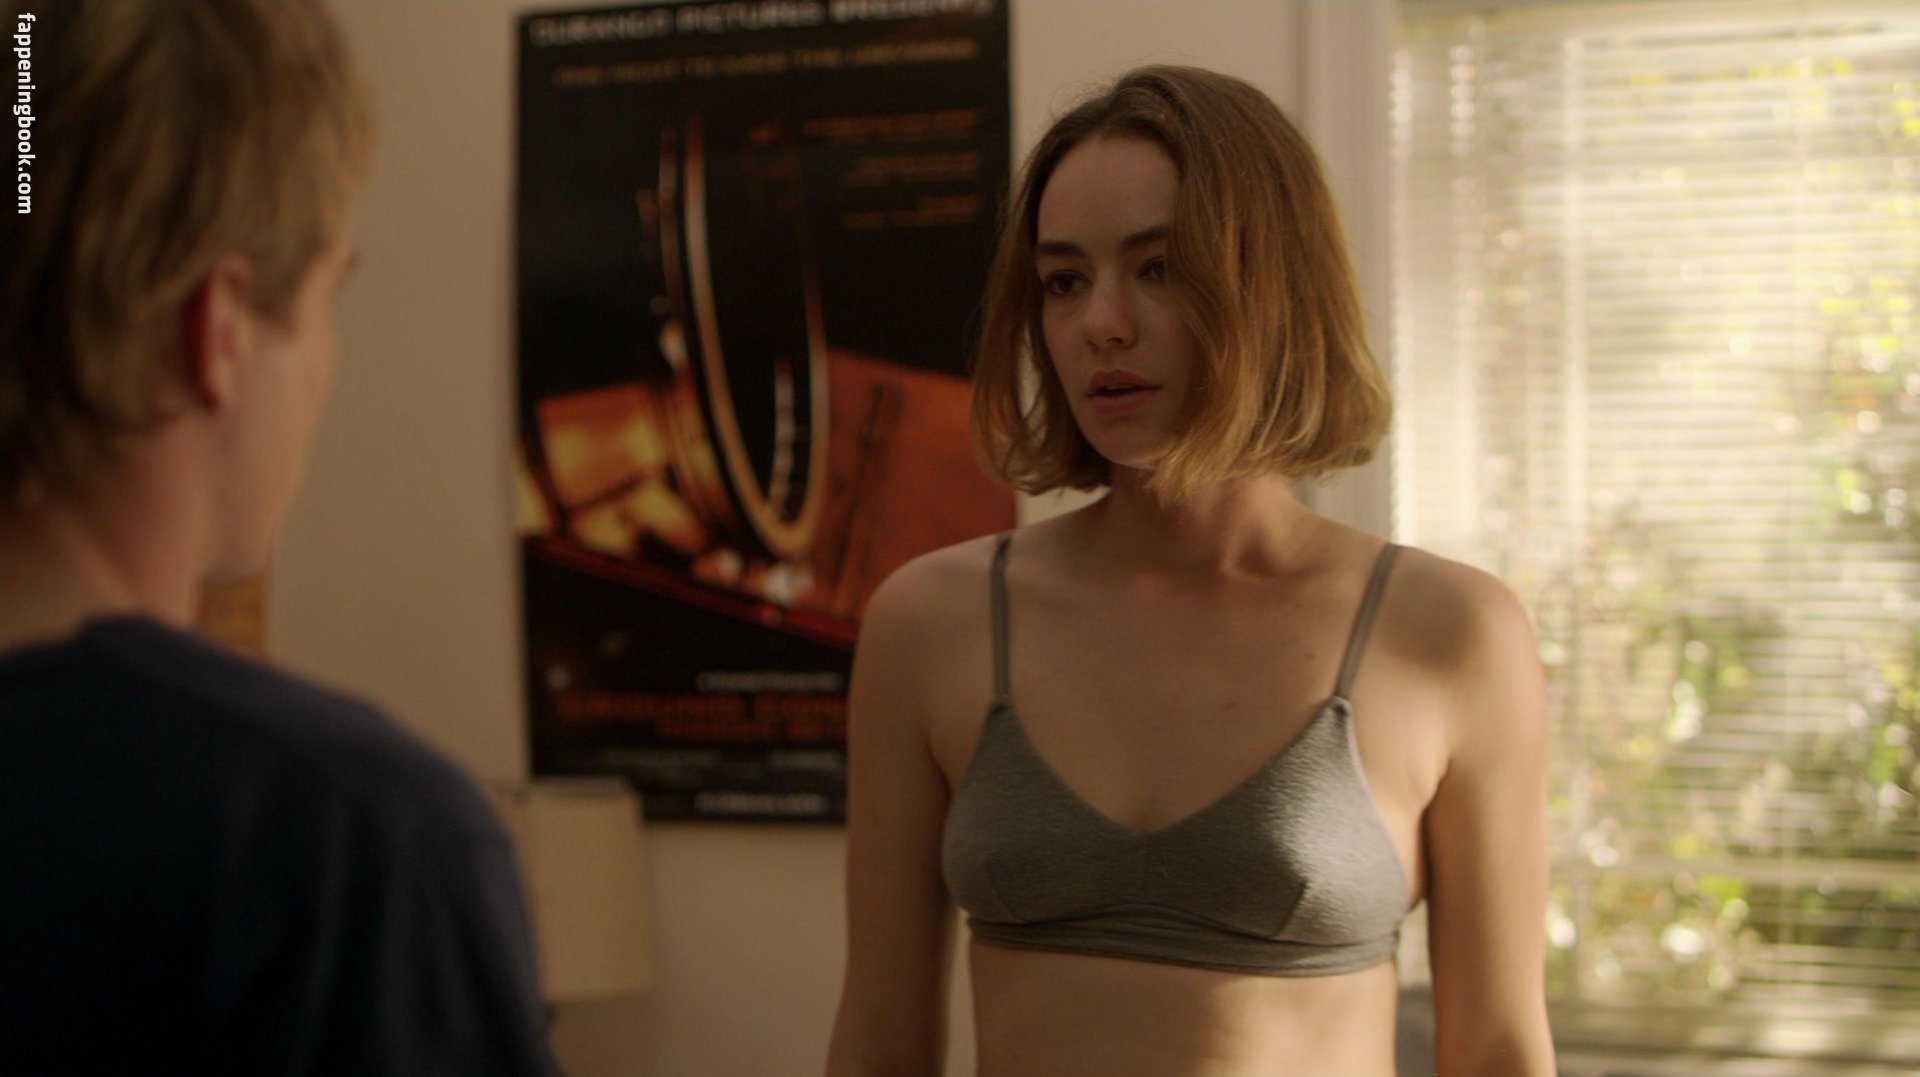 Brigette Lundy-Paine Nude, The Fappening - Photo #86655 - FappeningBook.